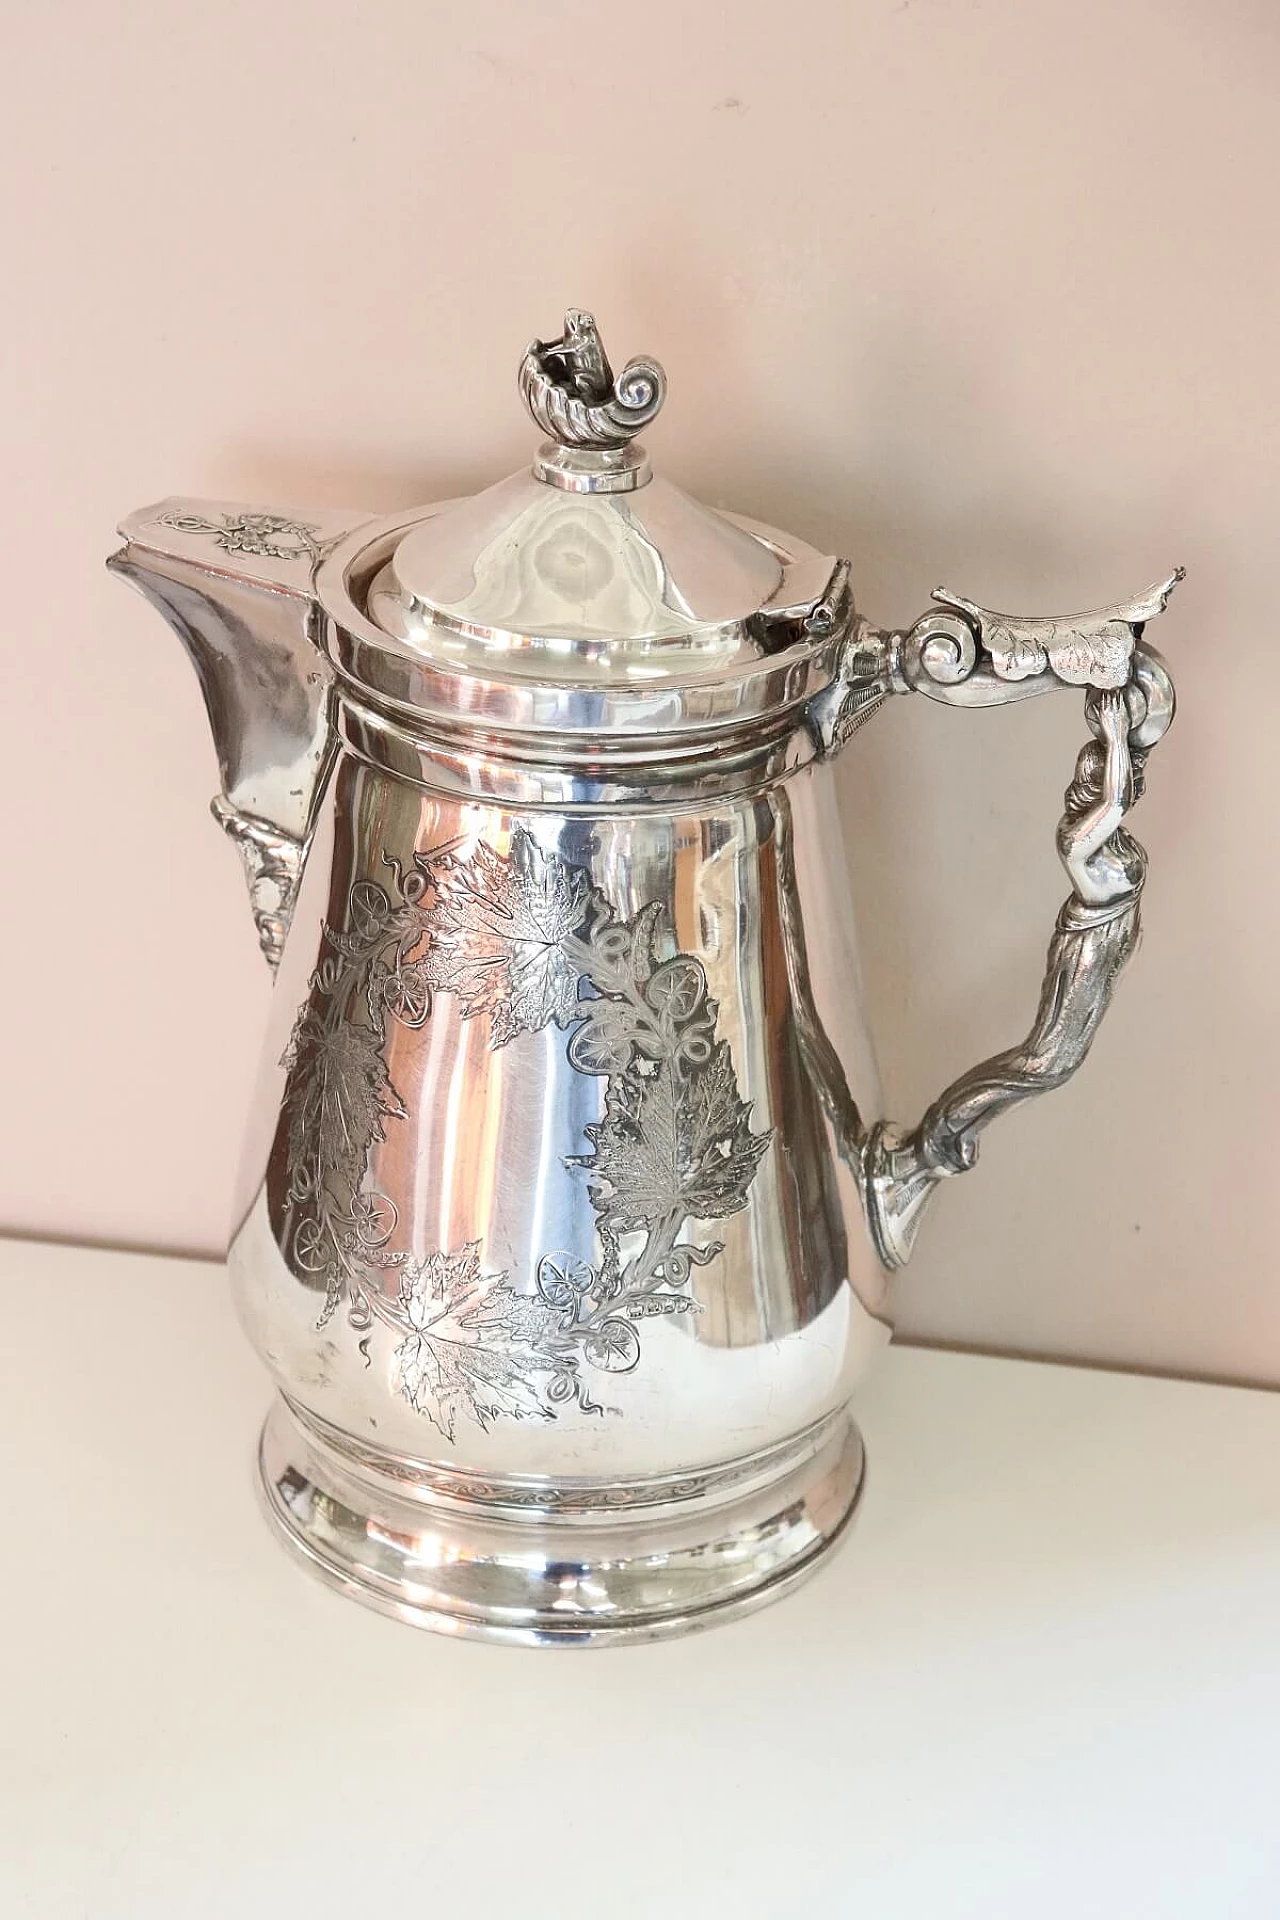 Antique silver plated pitcher by Wilcox, 1868 1067047